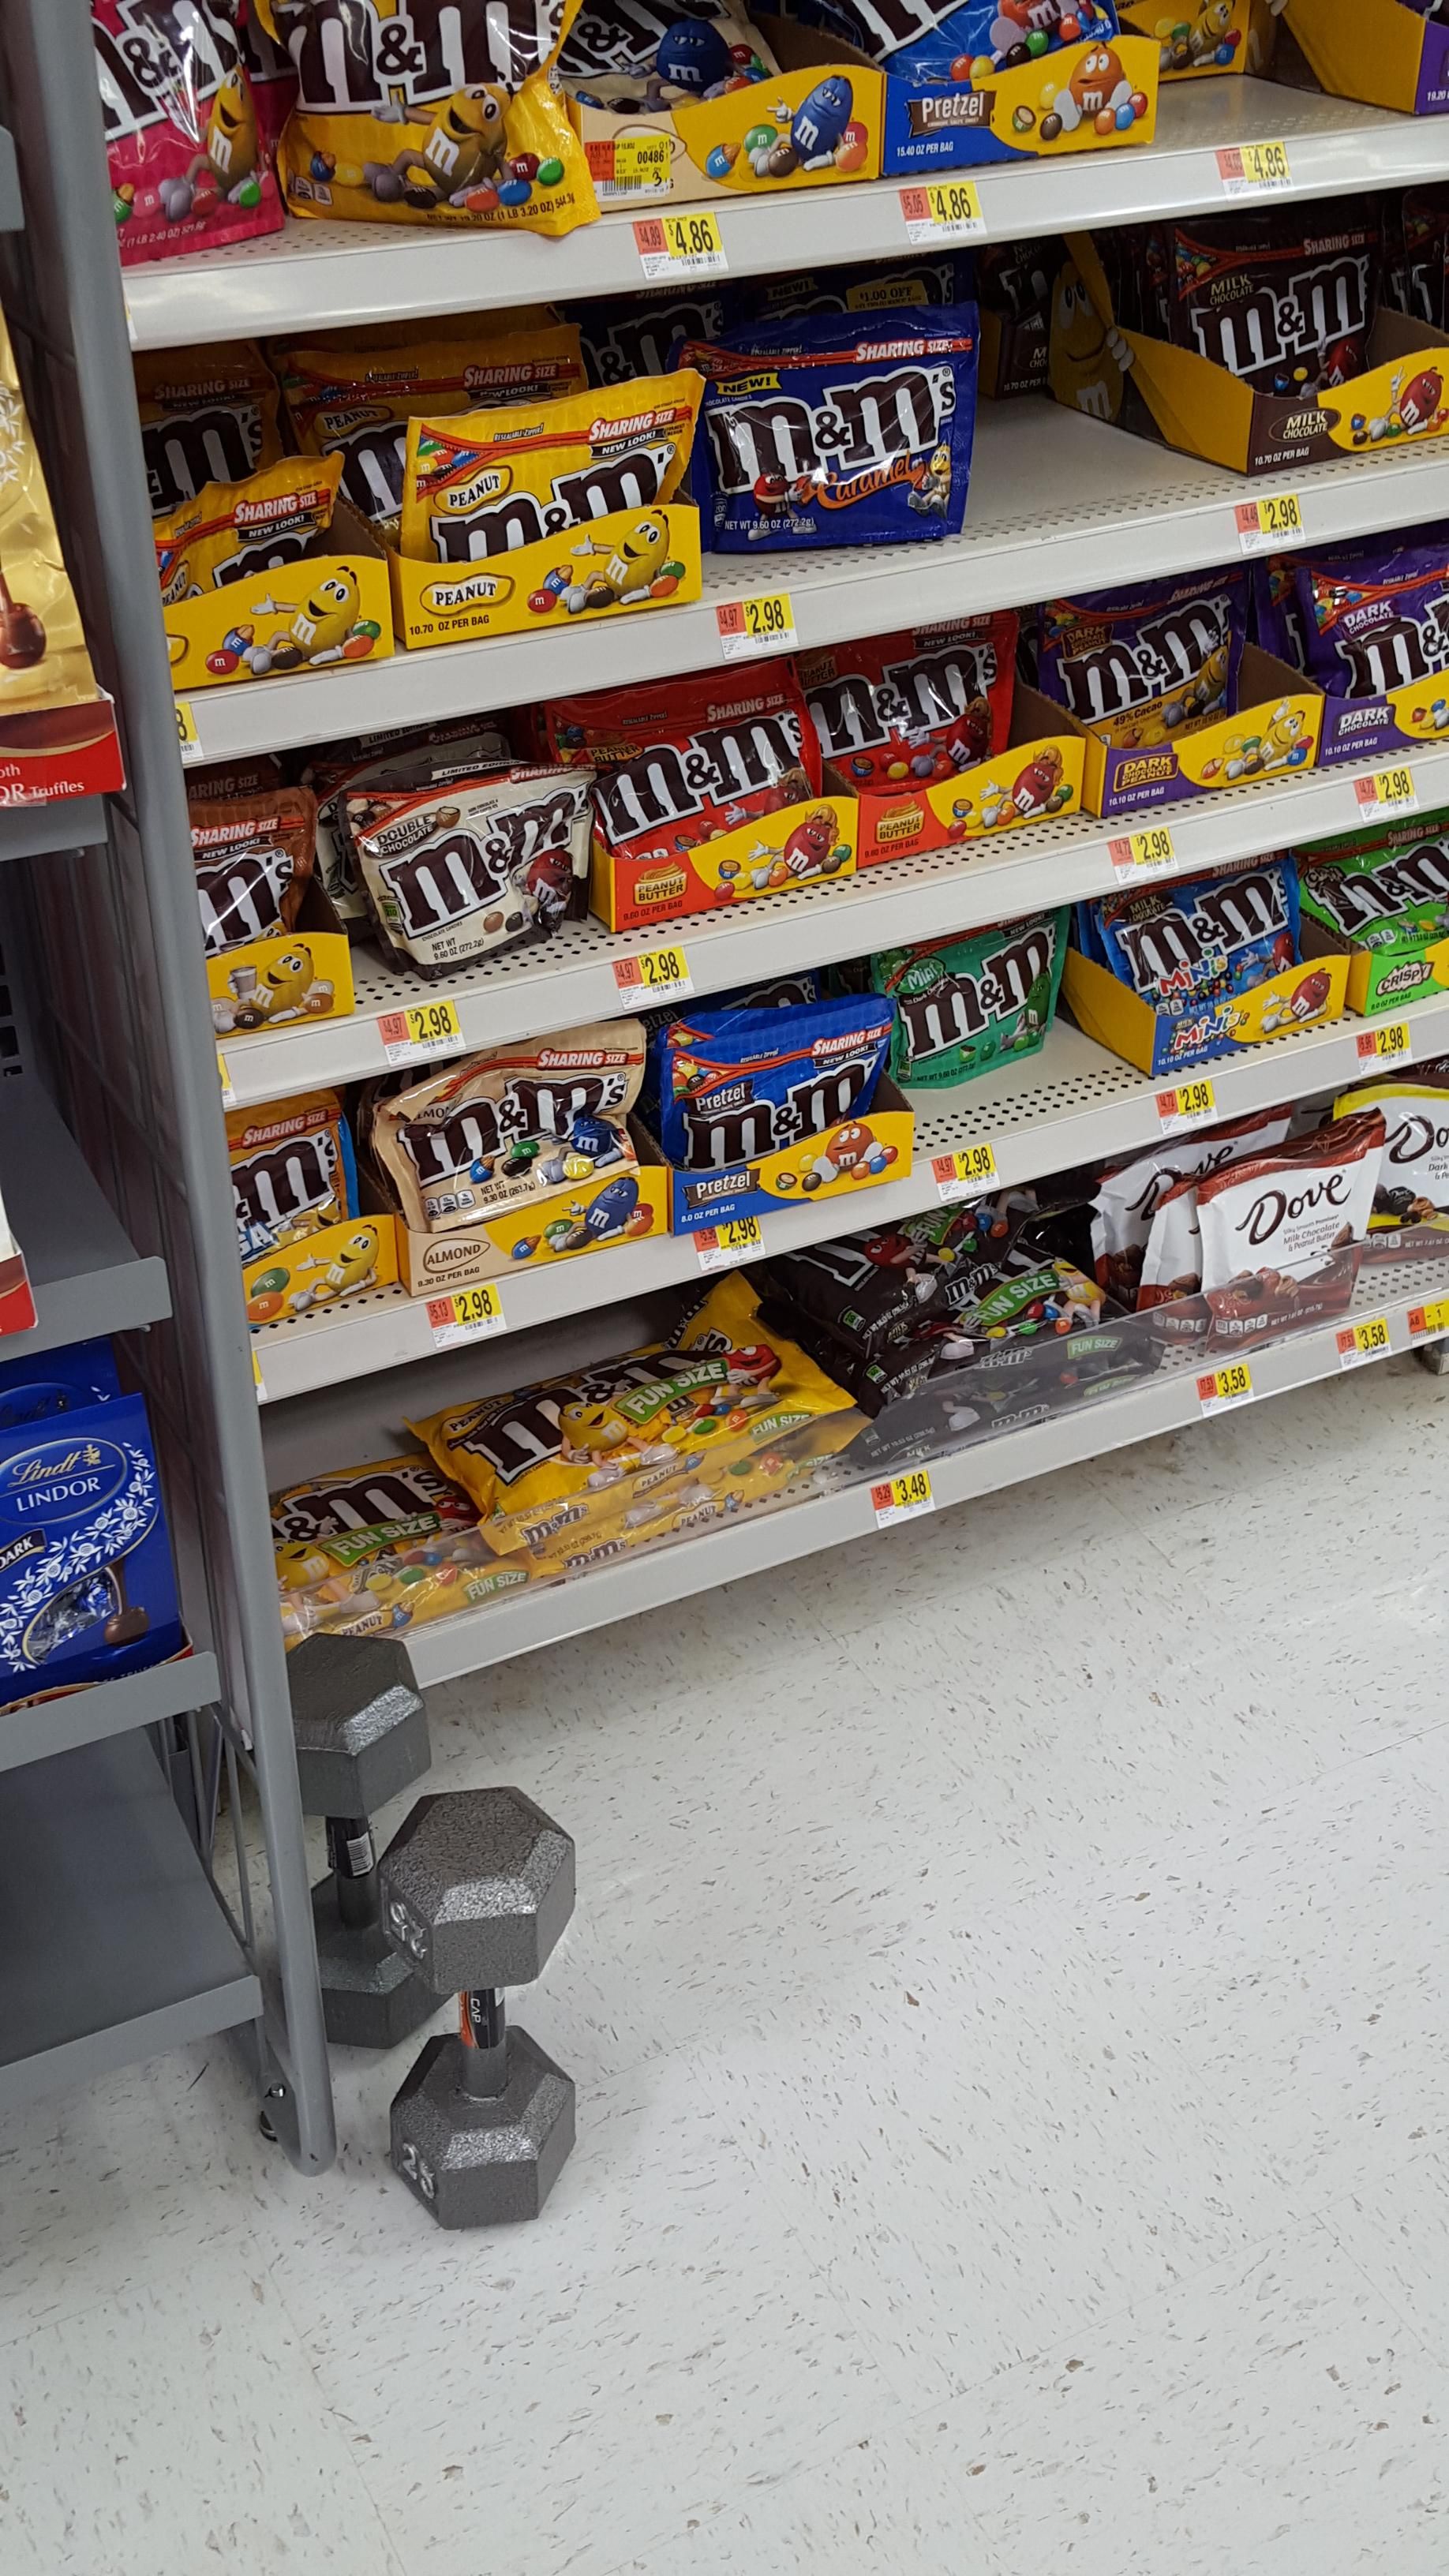 a big decision was made here today